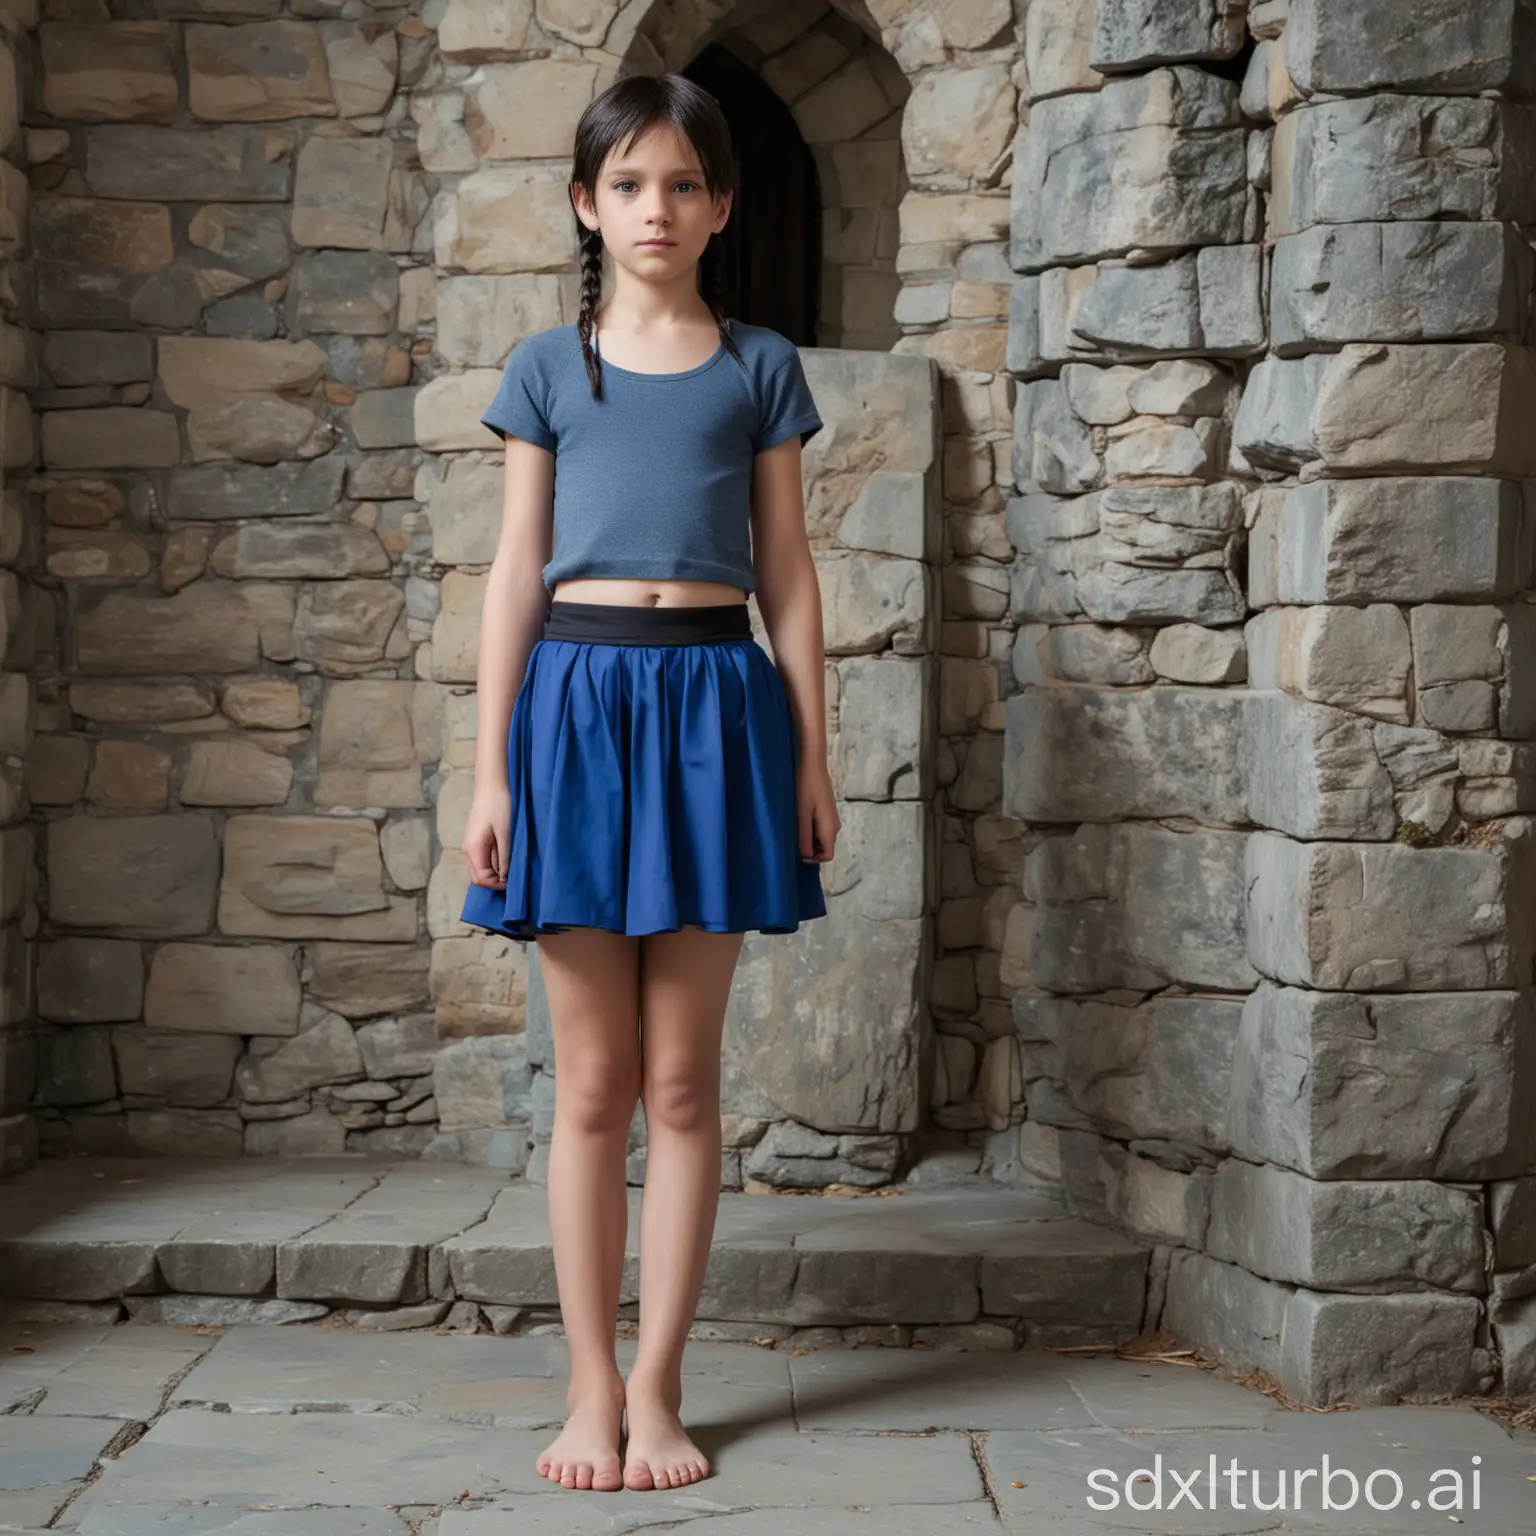 Boy-in-Blue-Skirt-with-Braided-Hair-in-Stone-Castle